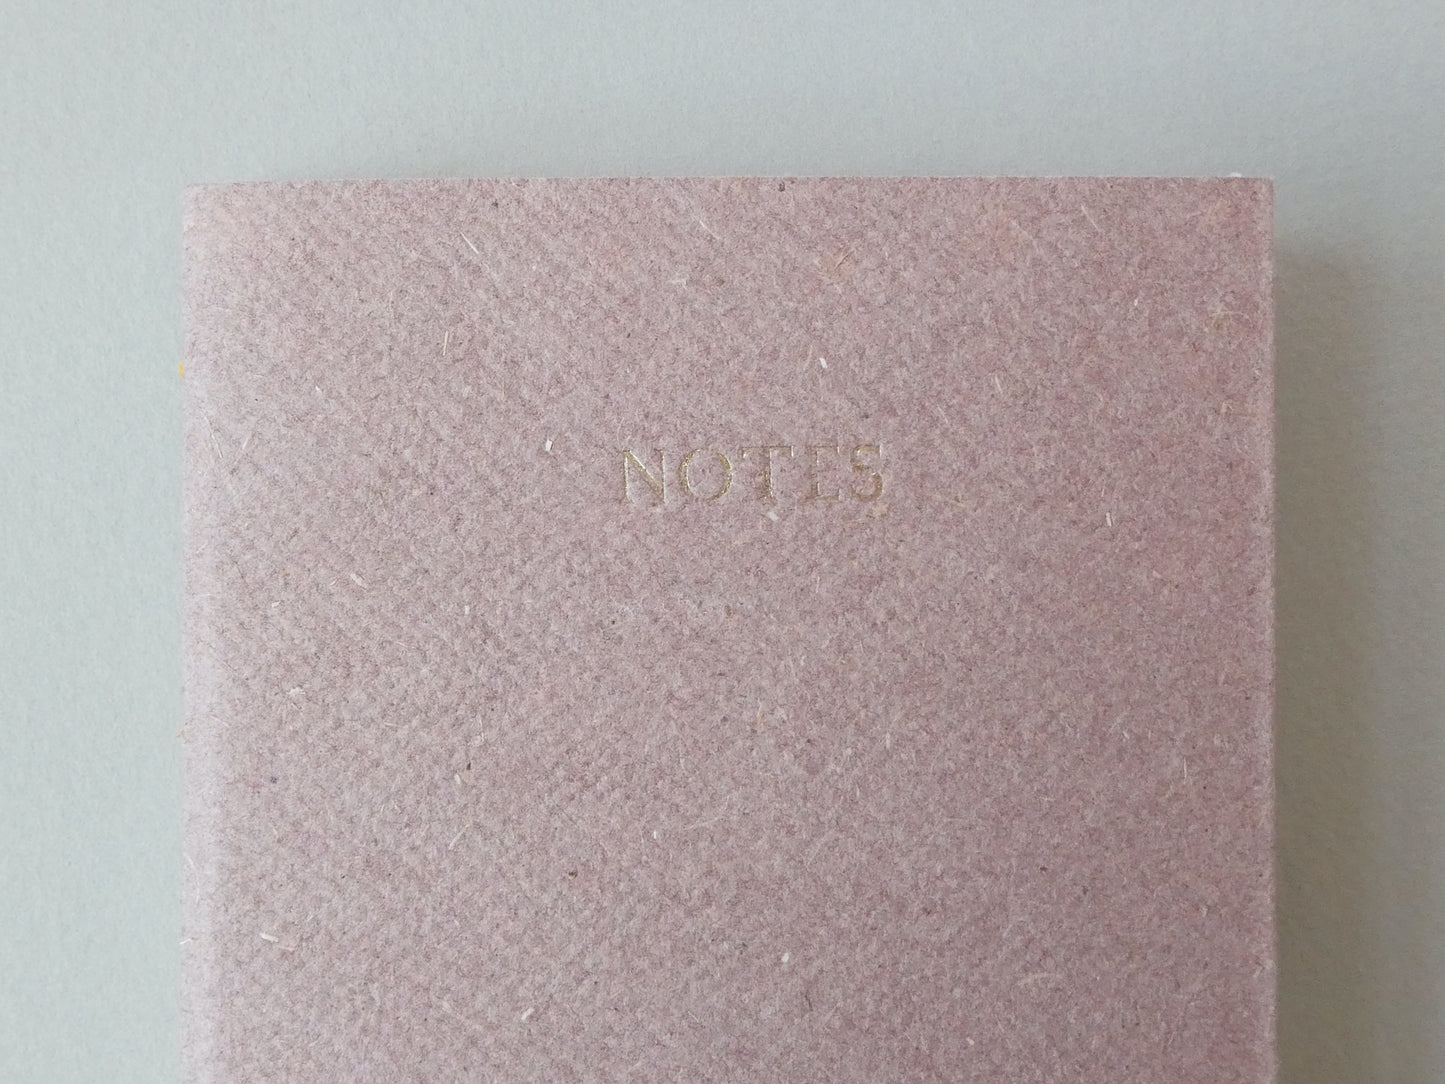 Celandine Books pink notebook with gold lettering